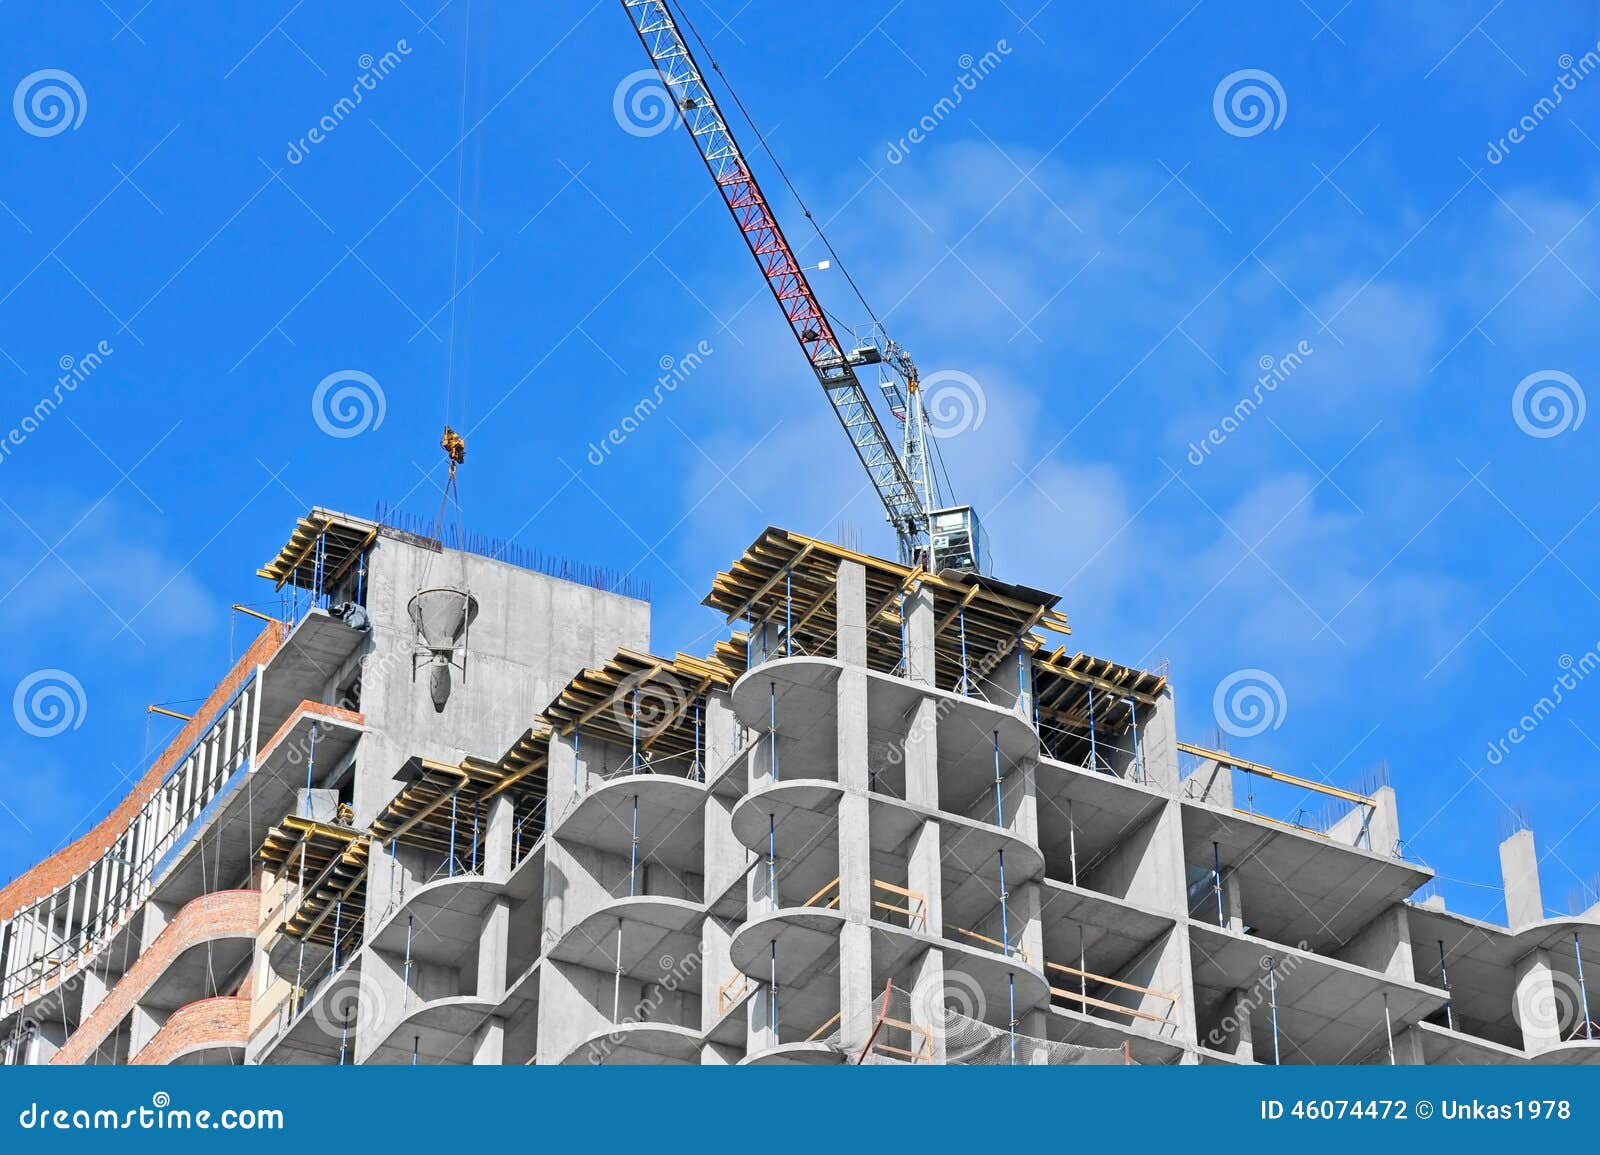 Crane Lifting Cement Mixing Container Stock Photo - Image of crane